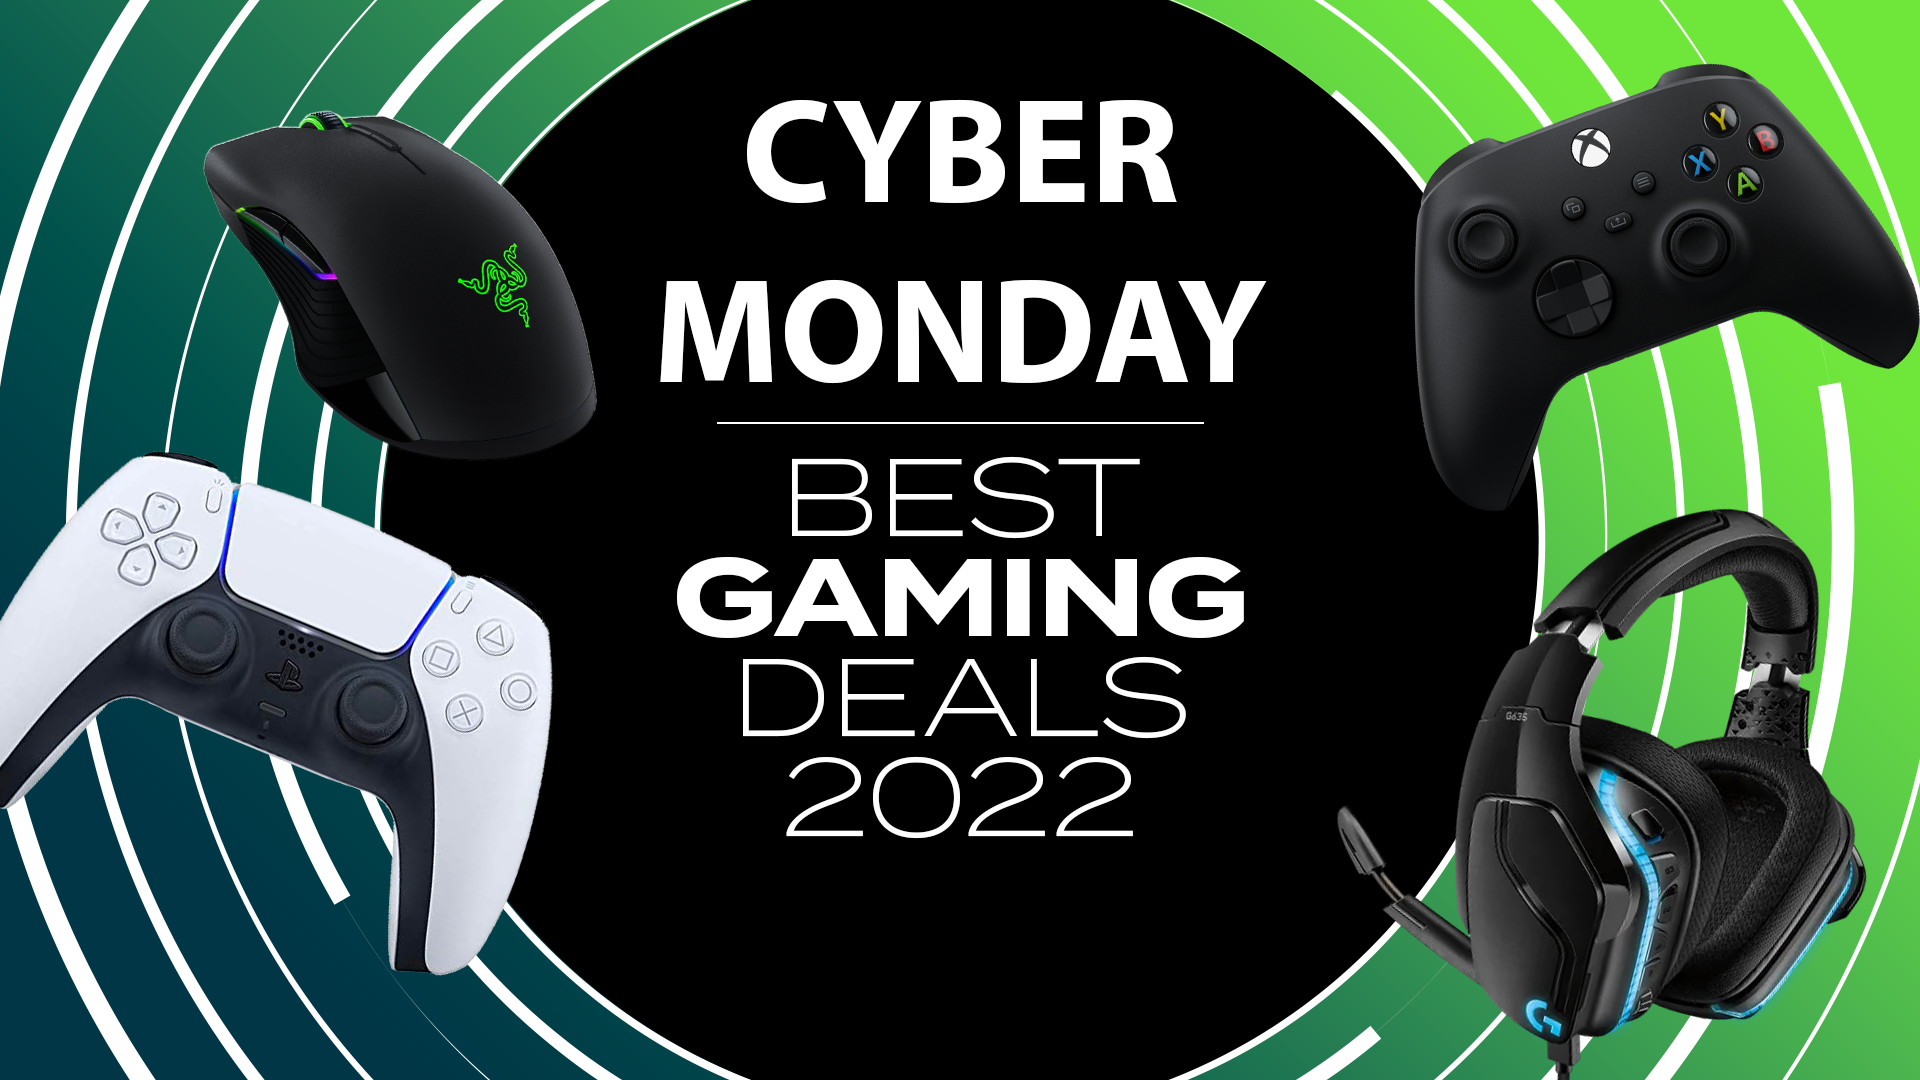 Image for Cyber Monday gaming deals 2022: best sales, discounts and offers